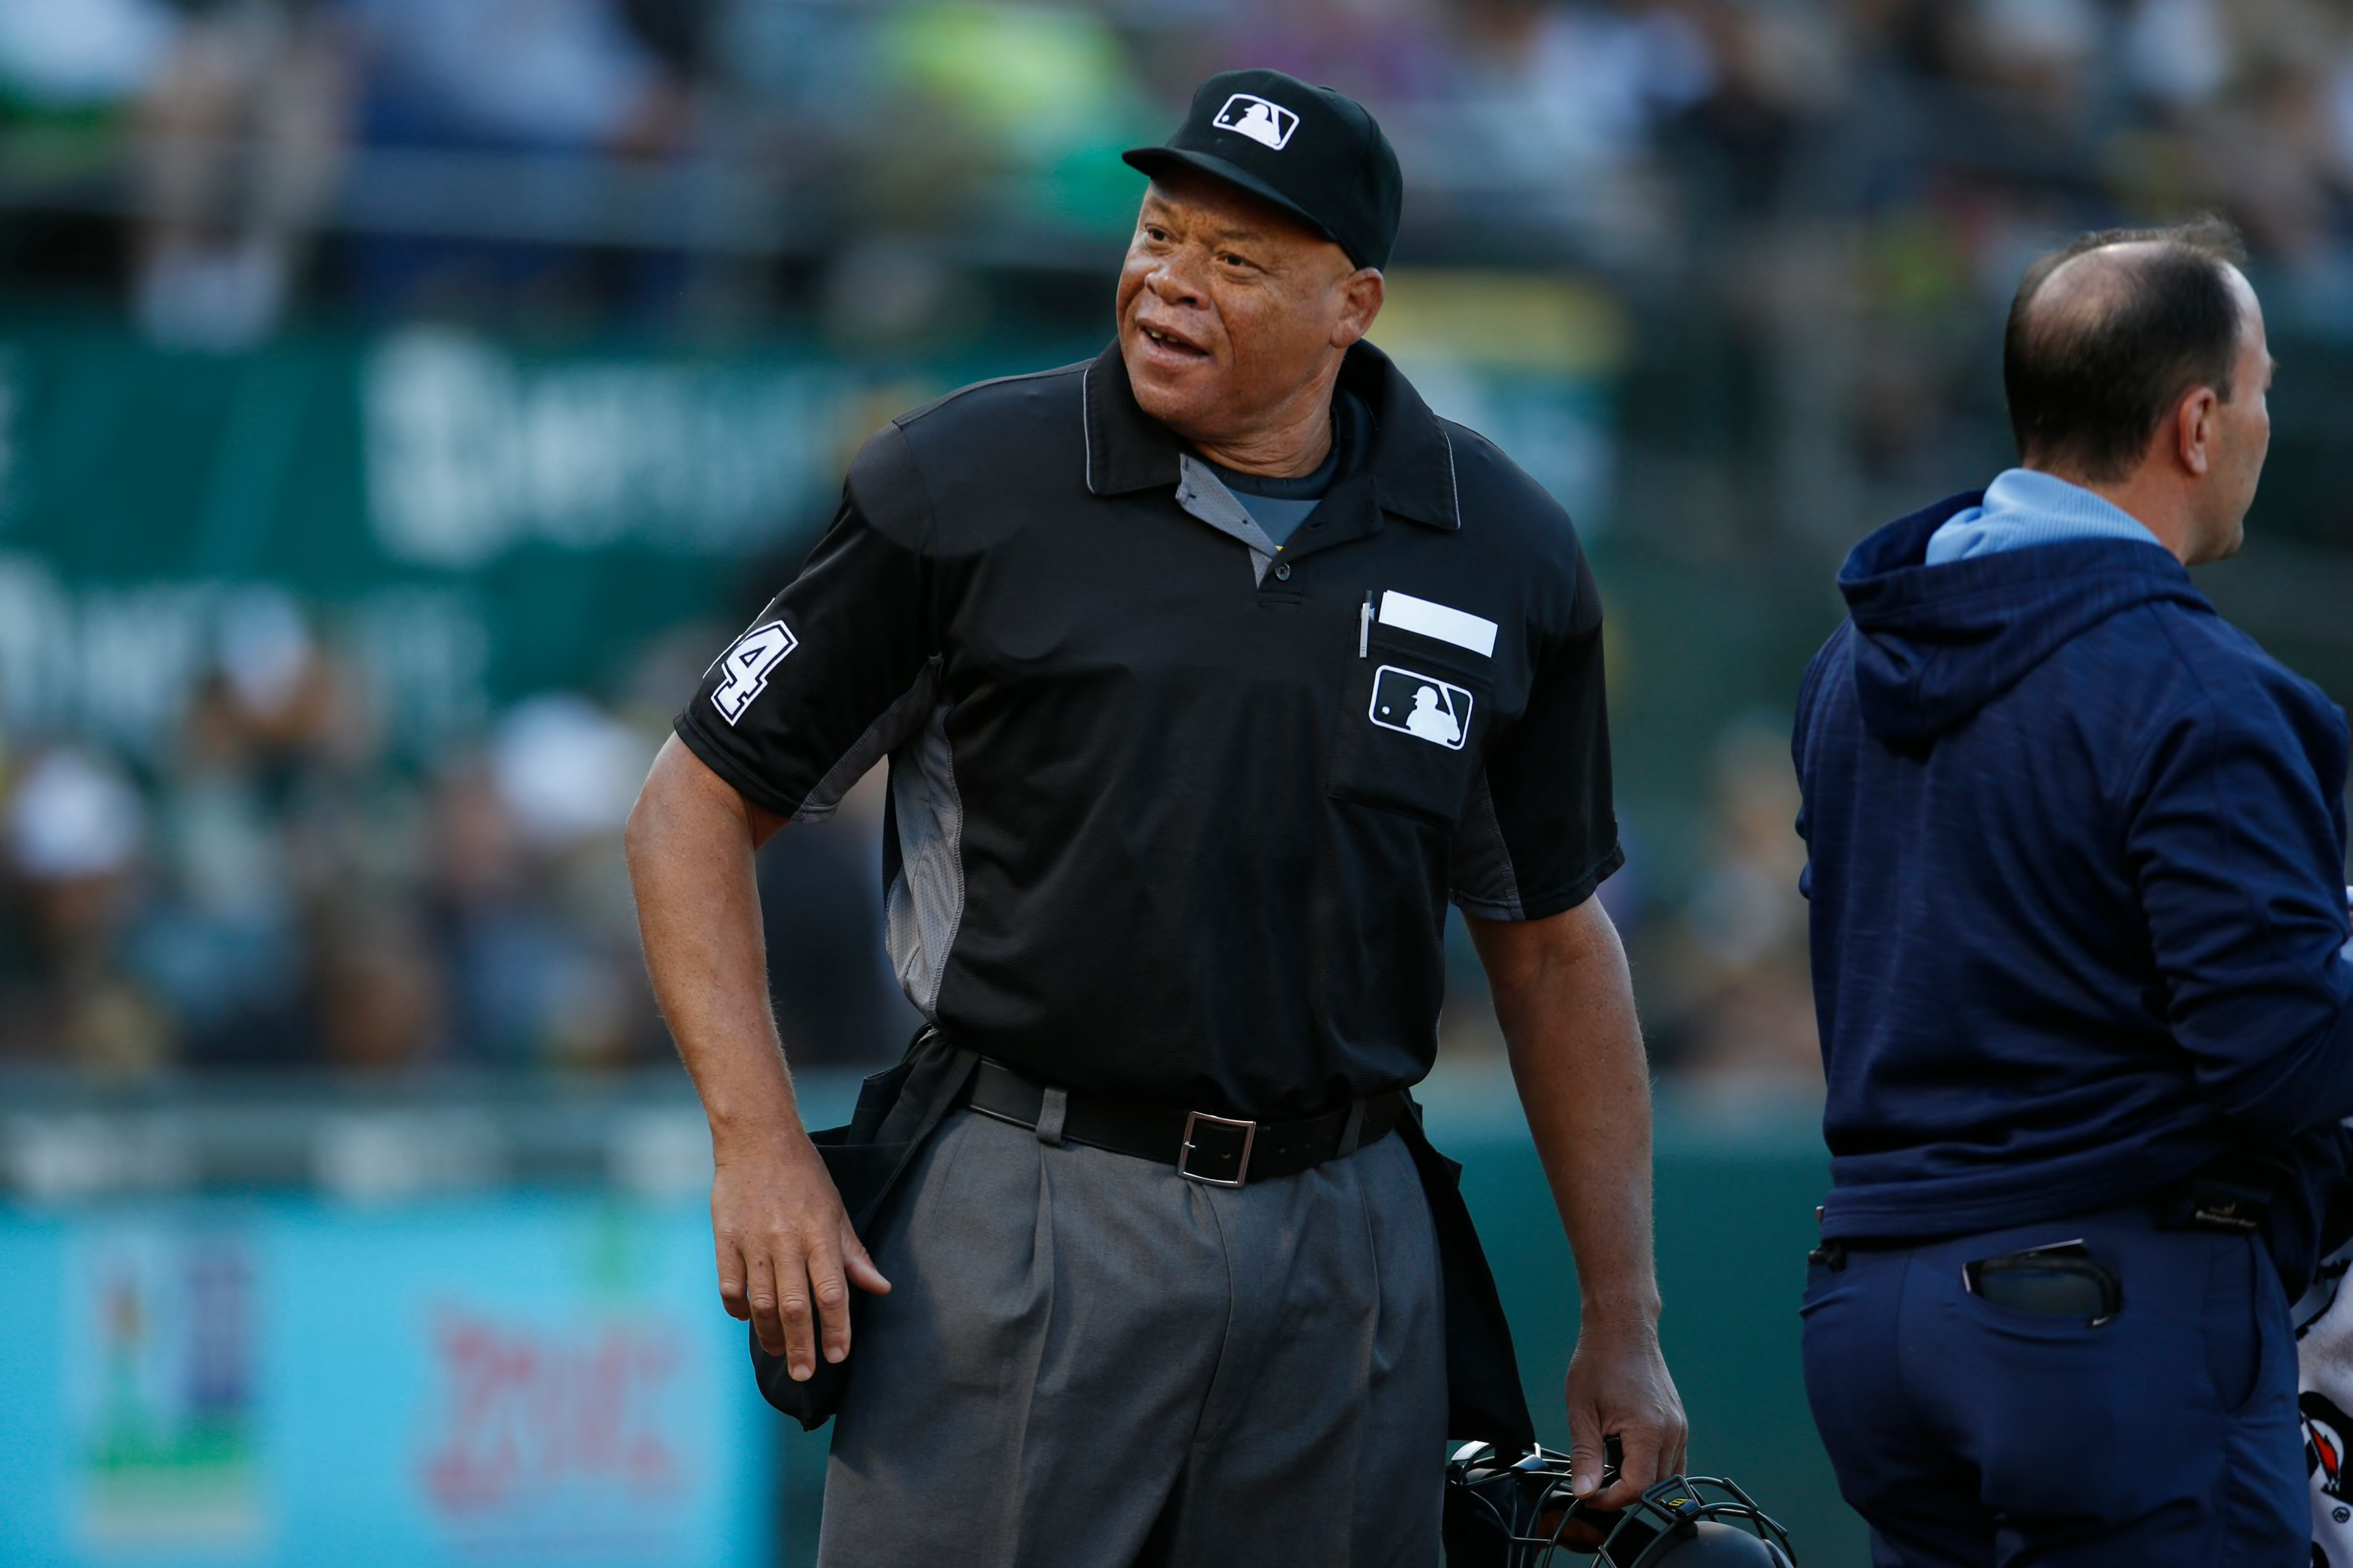 MLB umpires continue brutal week with badly missed calls against Pirates  Red Sox  Sporting News